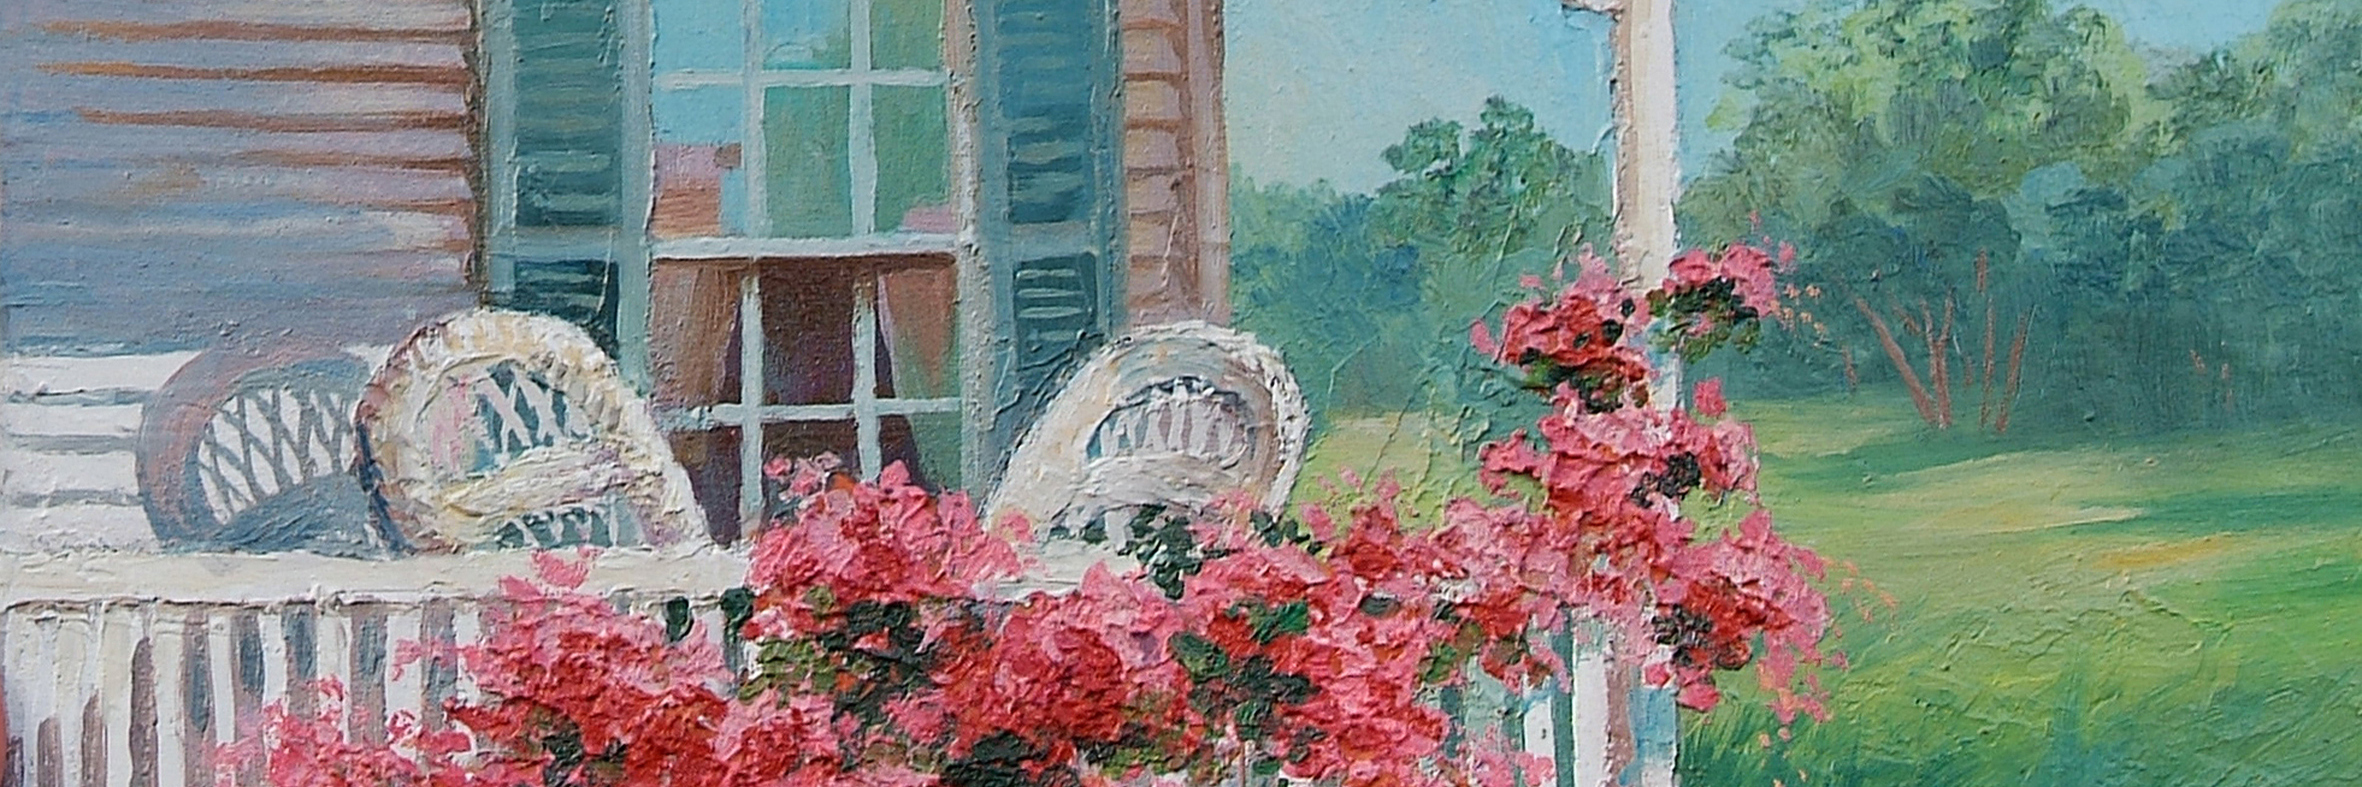 Oil painting of a house, with blue shutters and white chairs on porch.